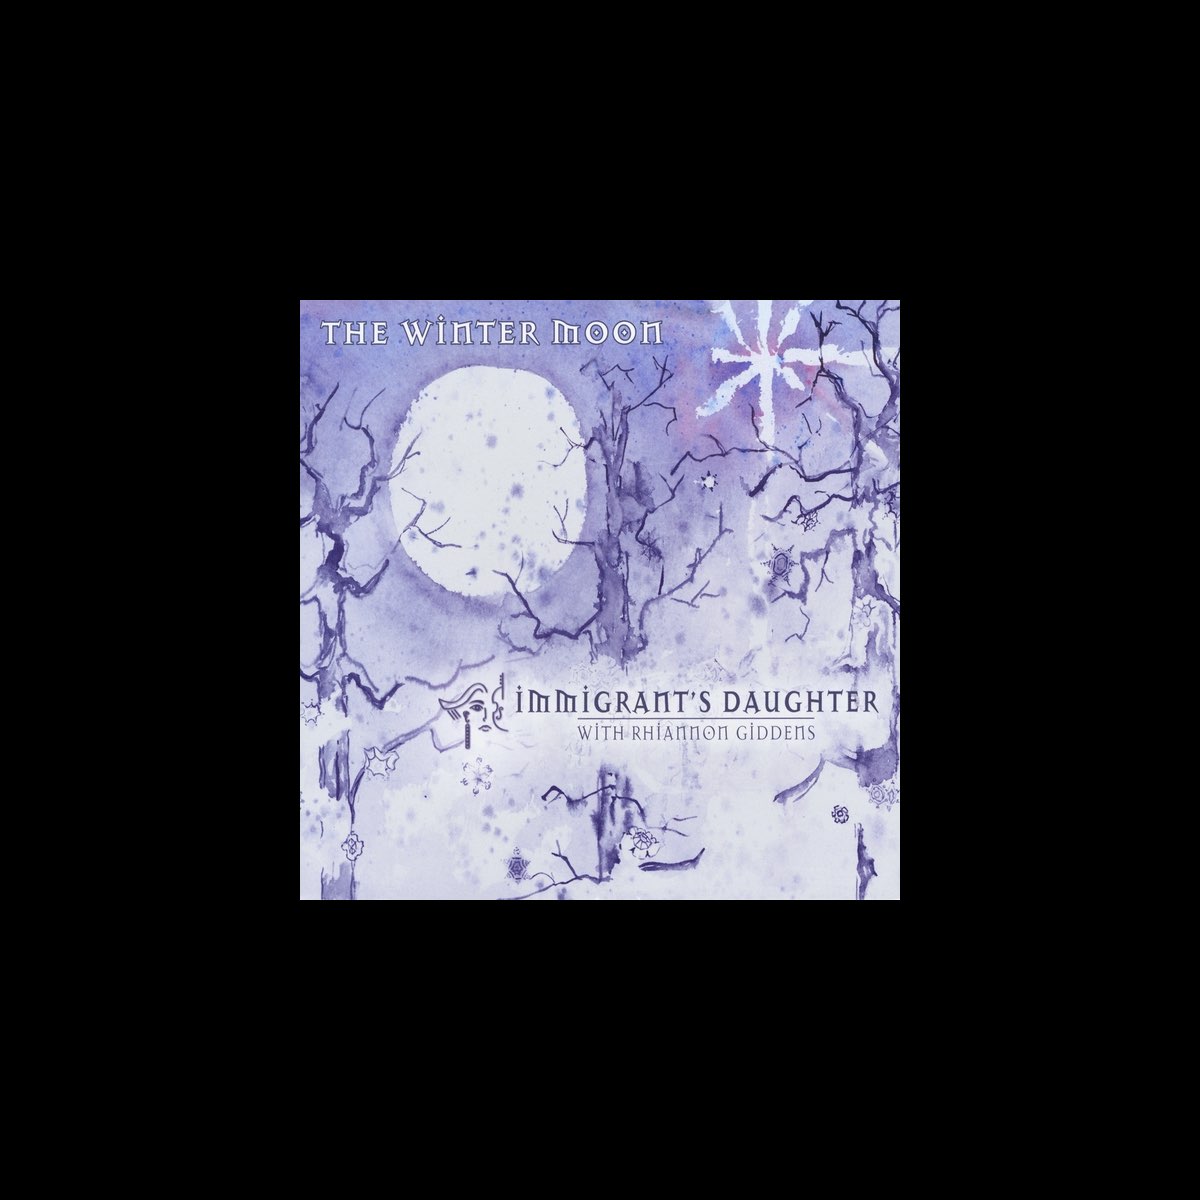 The Winter Moon - Album by Immigrant's Daughter - Apple Music